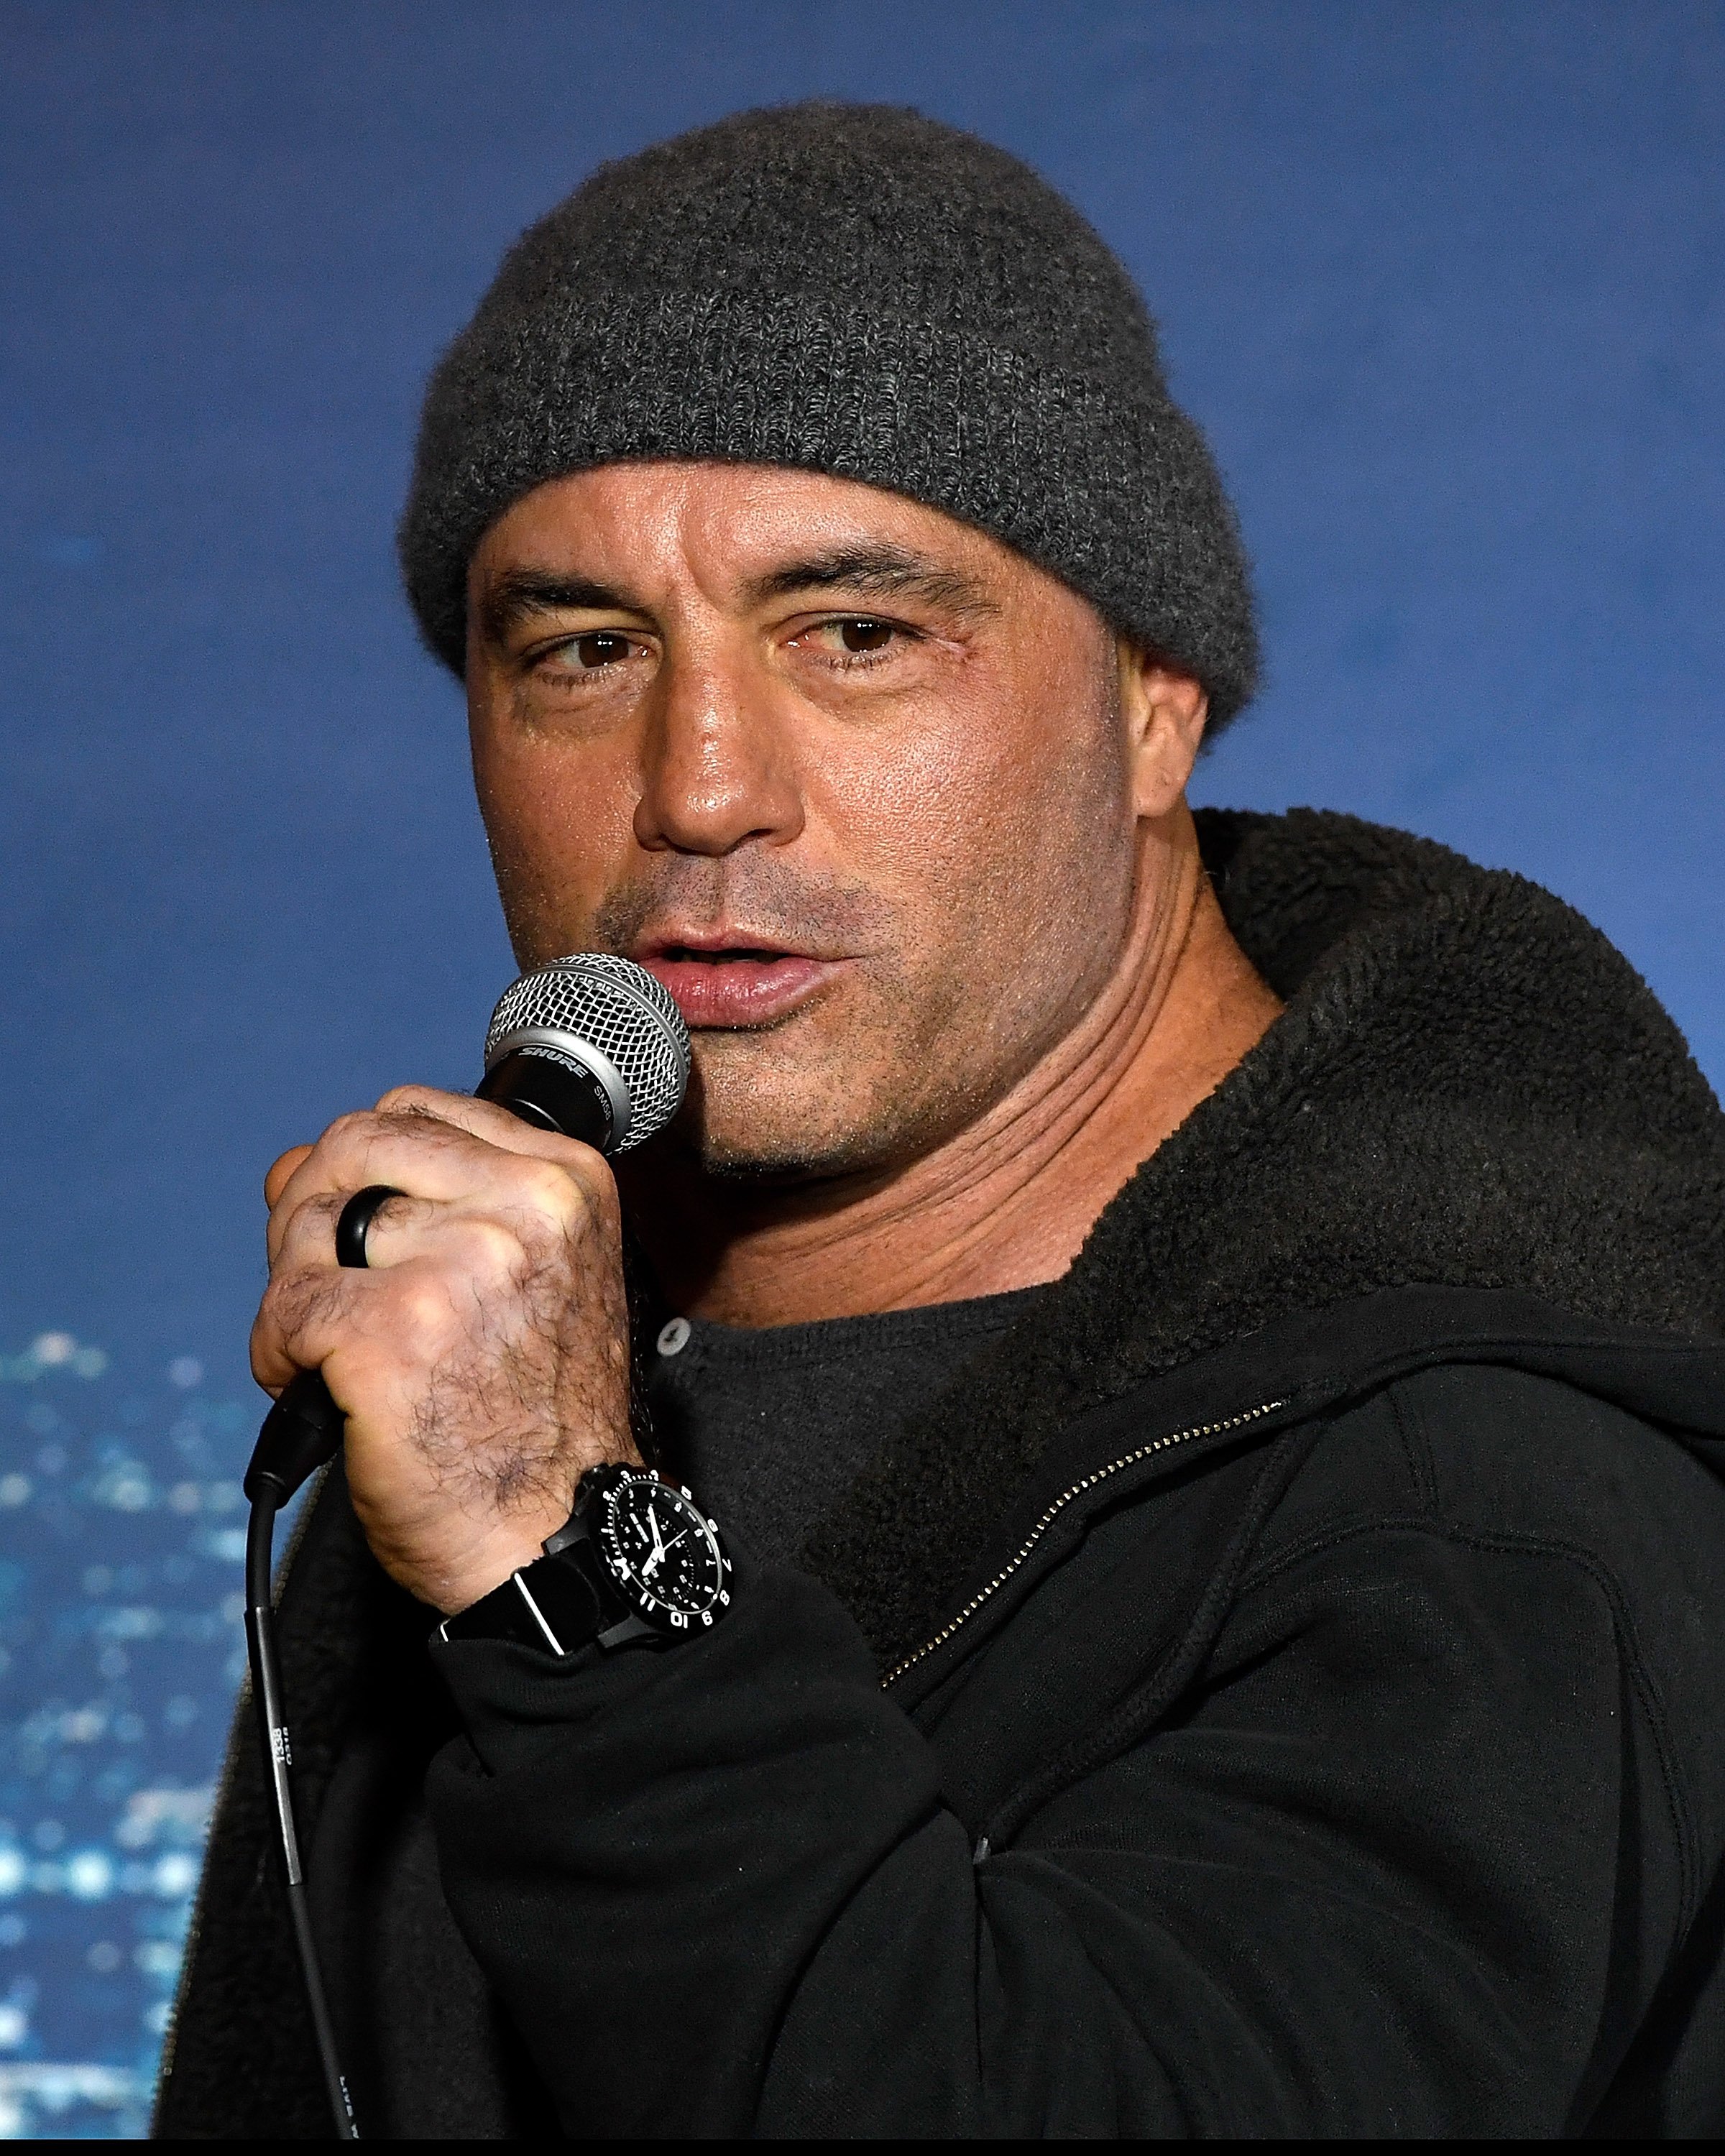 Comedian Joe Rogan performs during his appearance at The Ice House Comedy Club on February 20, 2019, in Pasadena, California. | Source: Getty Images